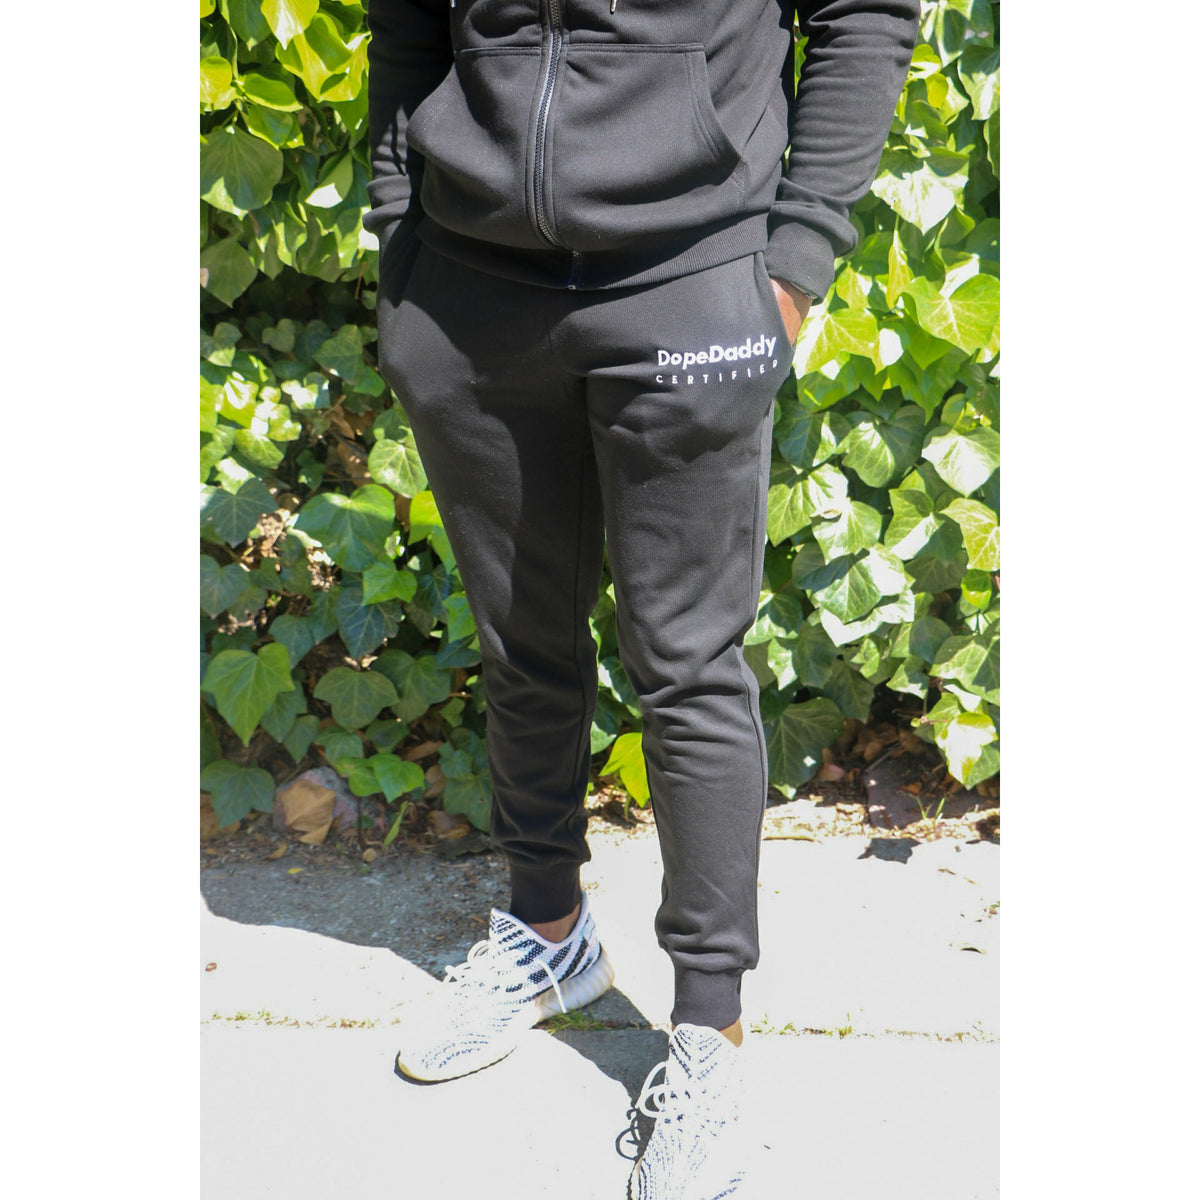 Dope Daddy Certified Sweatpant - Everyday Black